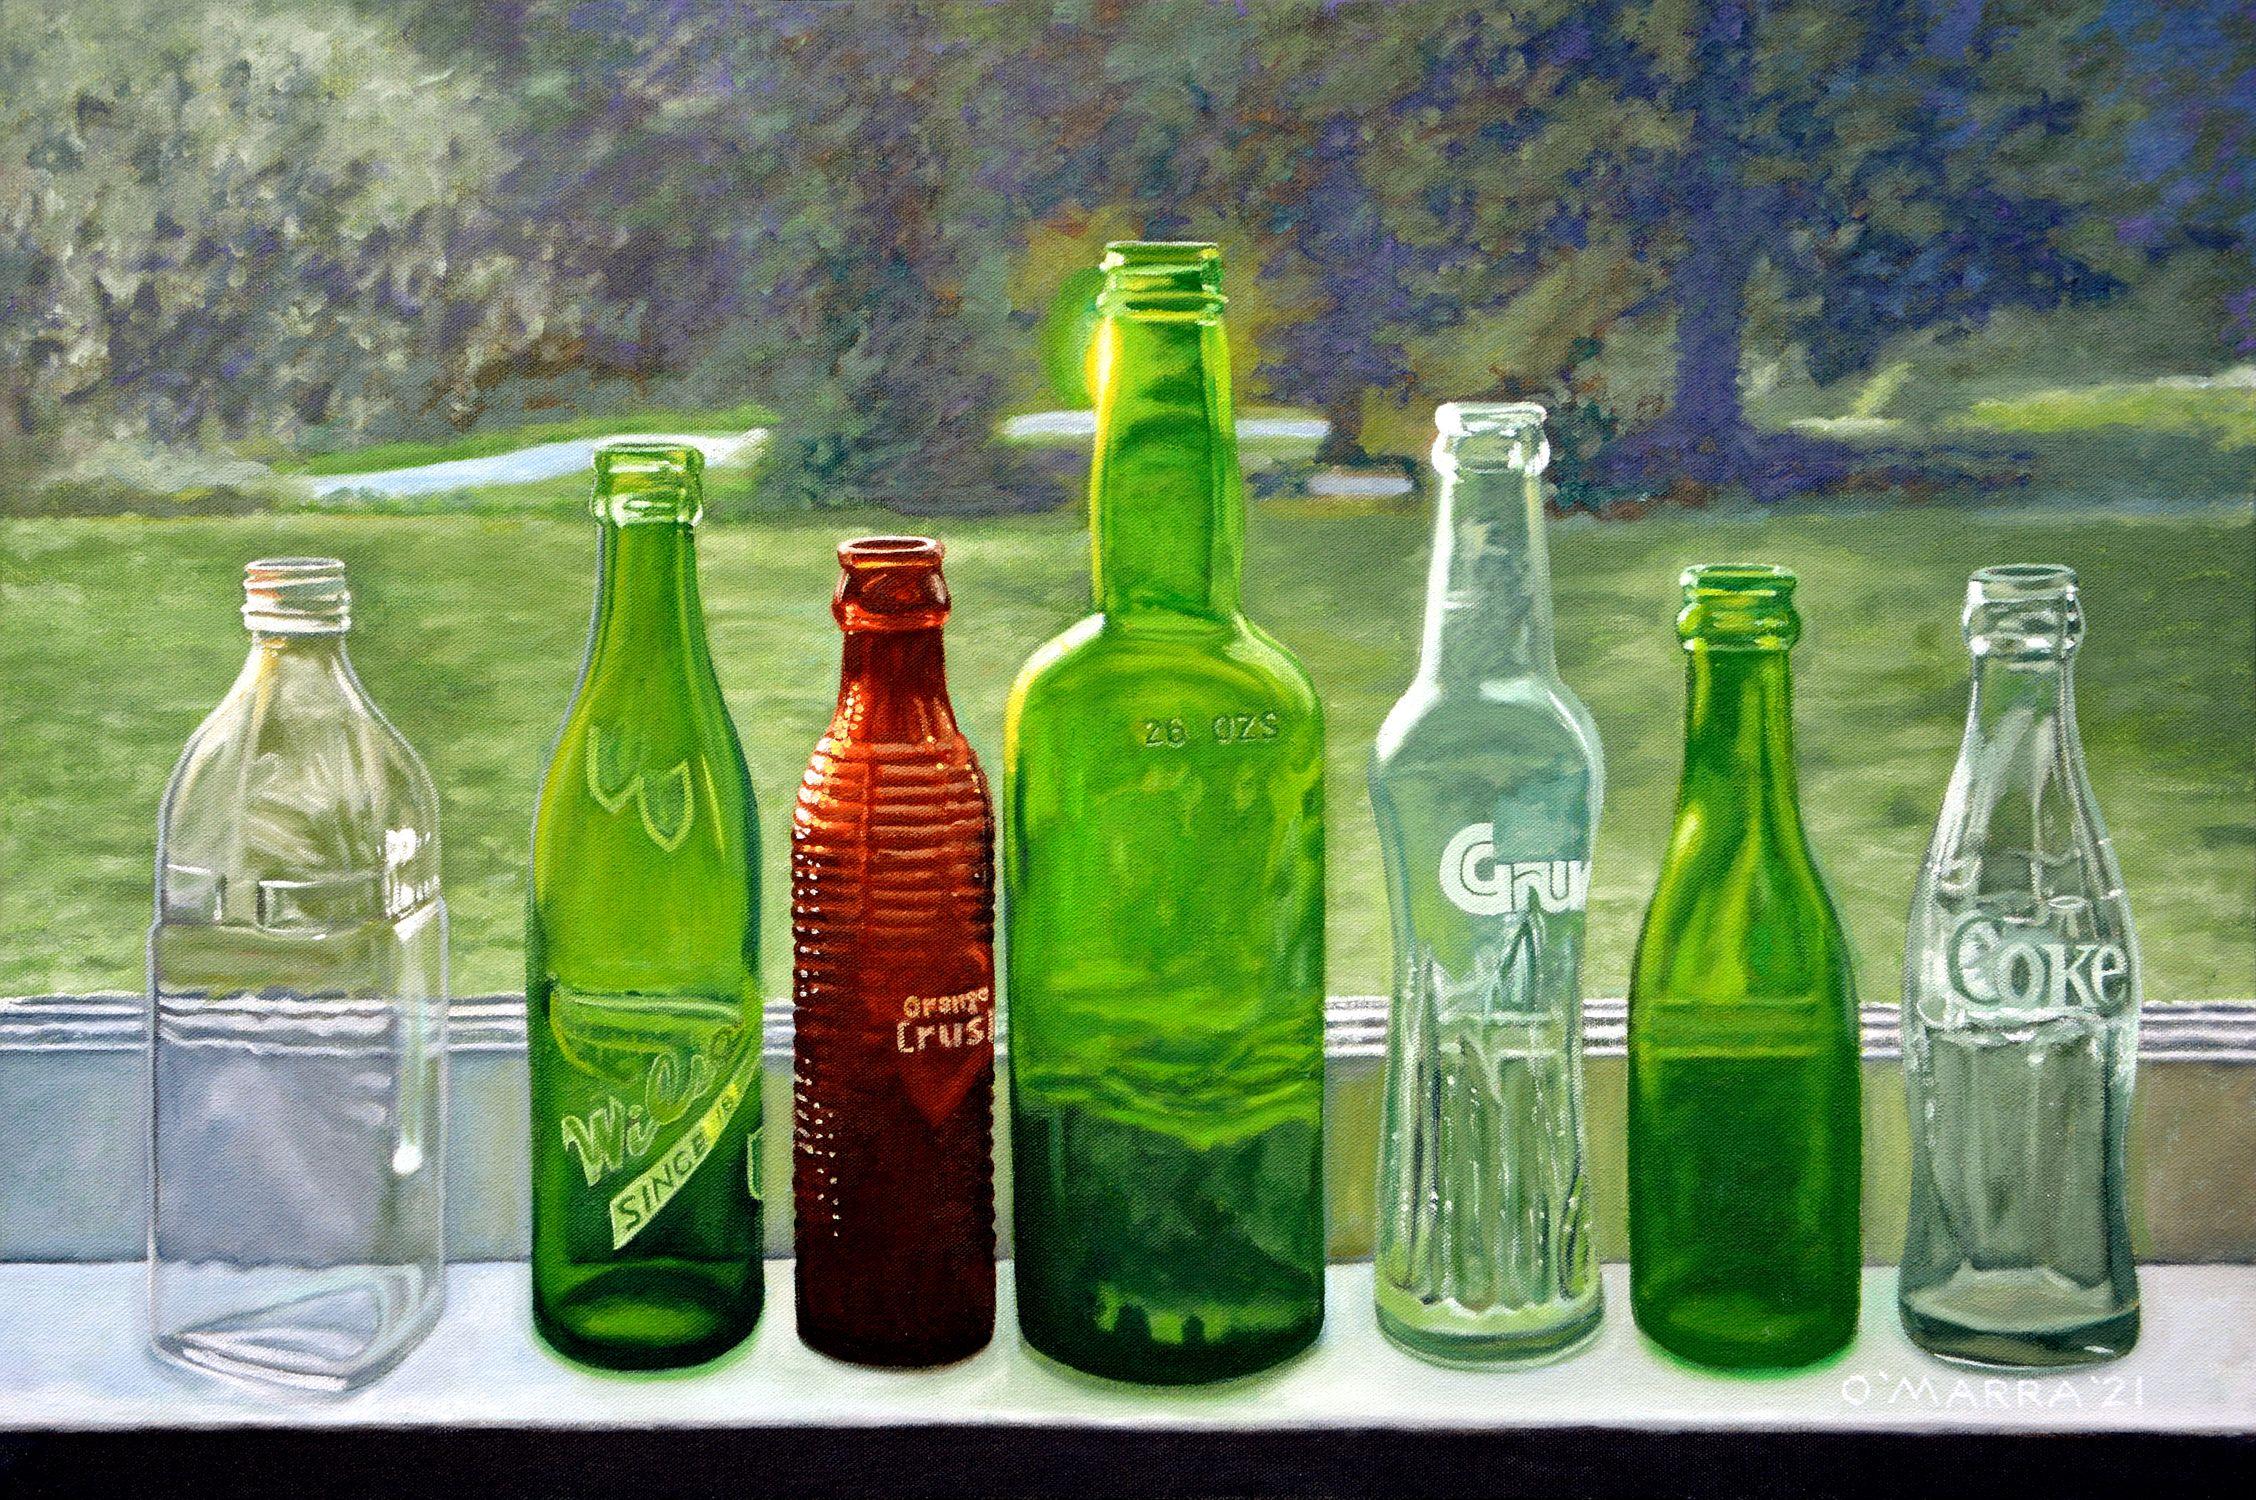 This is the sixth in a series of still lifes I have created over the years of antique bottles I've collected and keep displayed in windows in my rural studio/retreat. :: Painting :: Realism :: This piece comes with an official certificate of